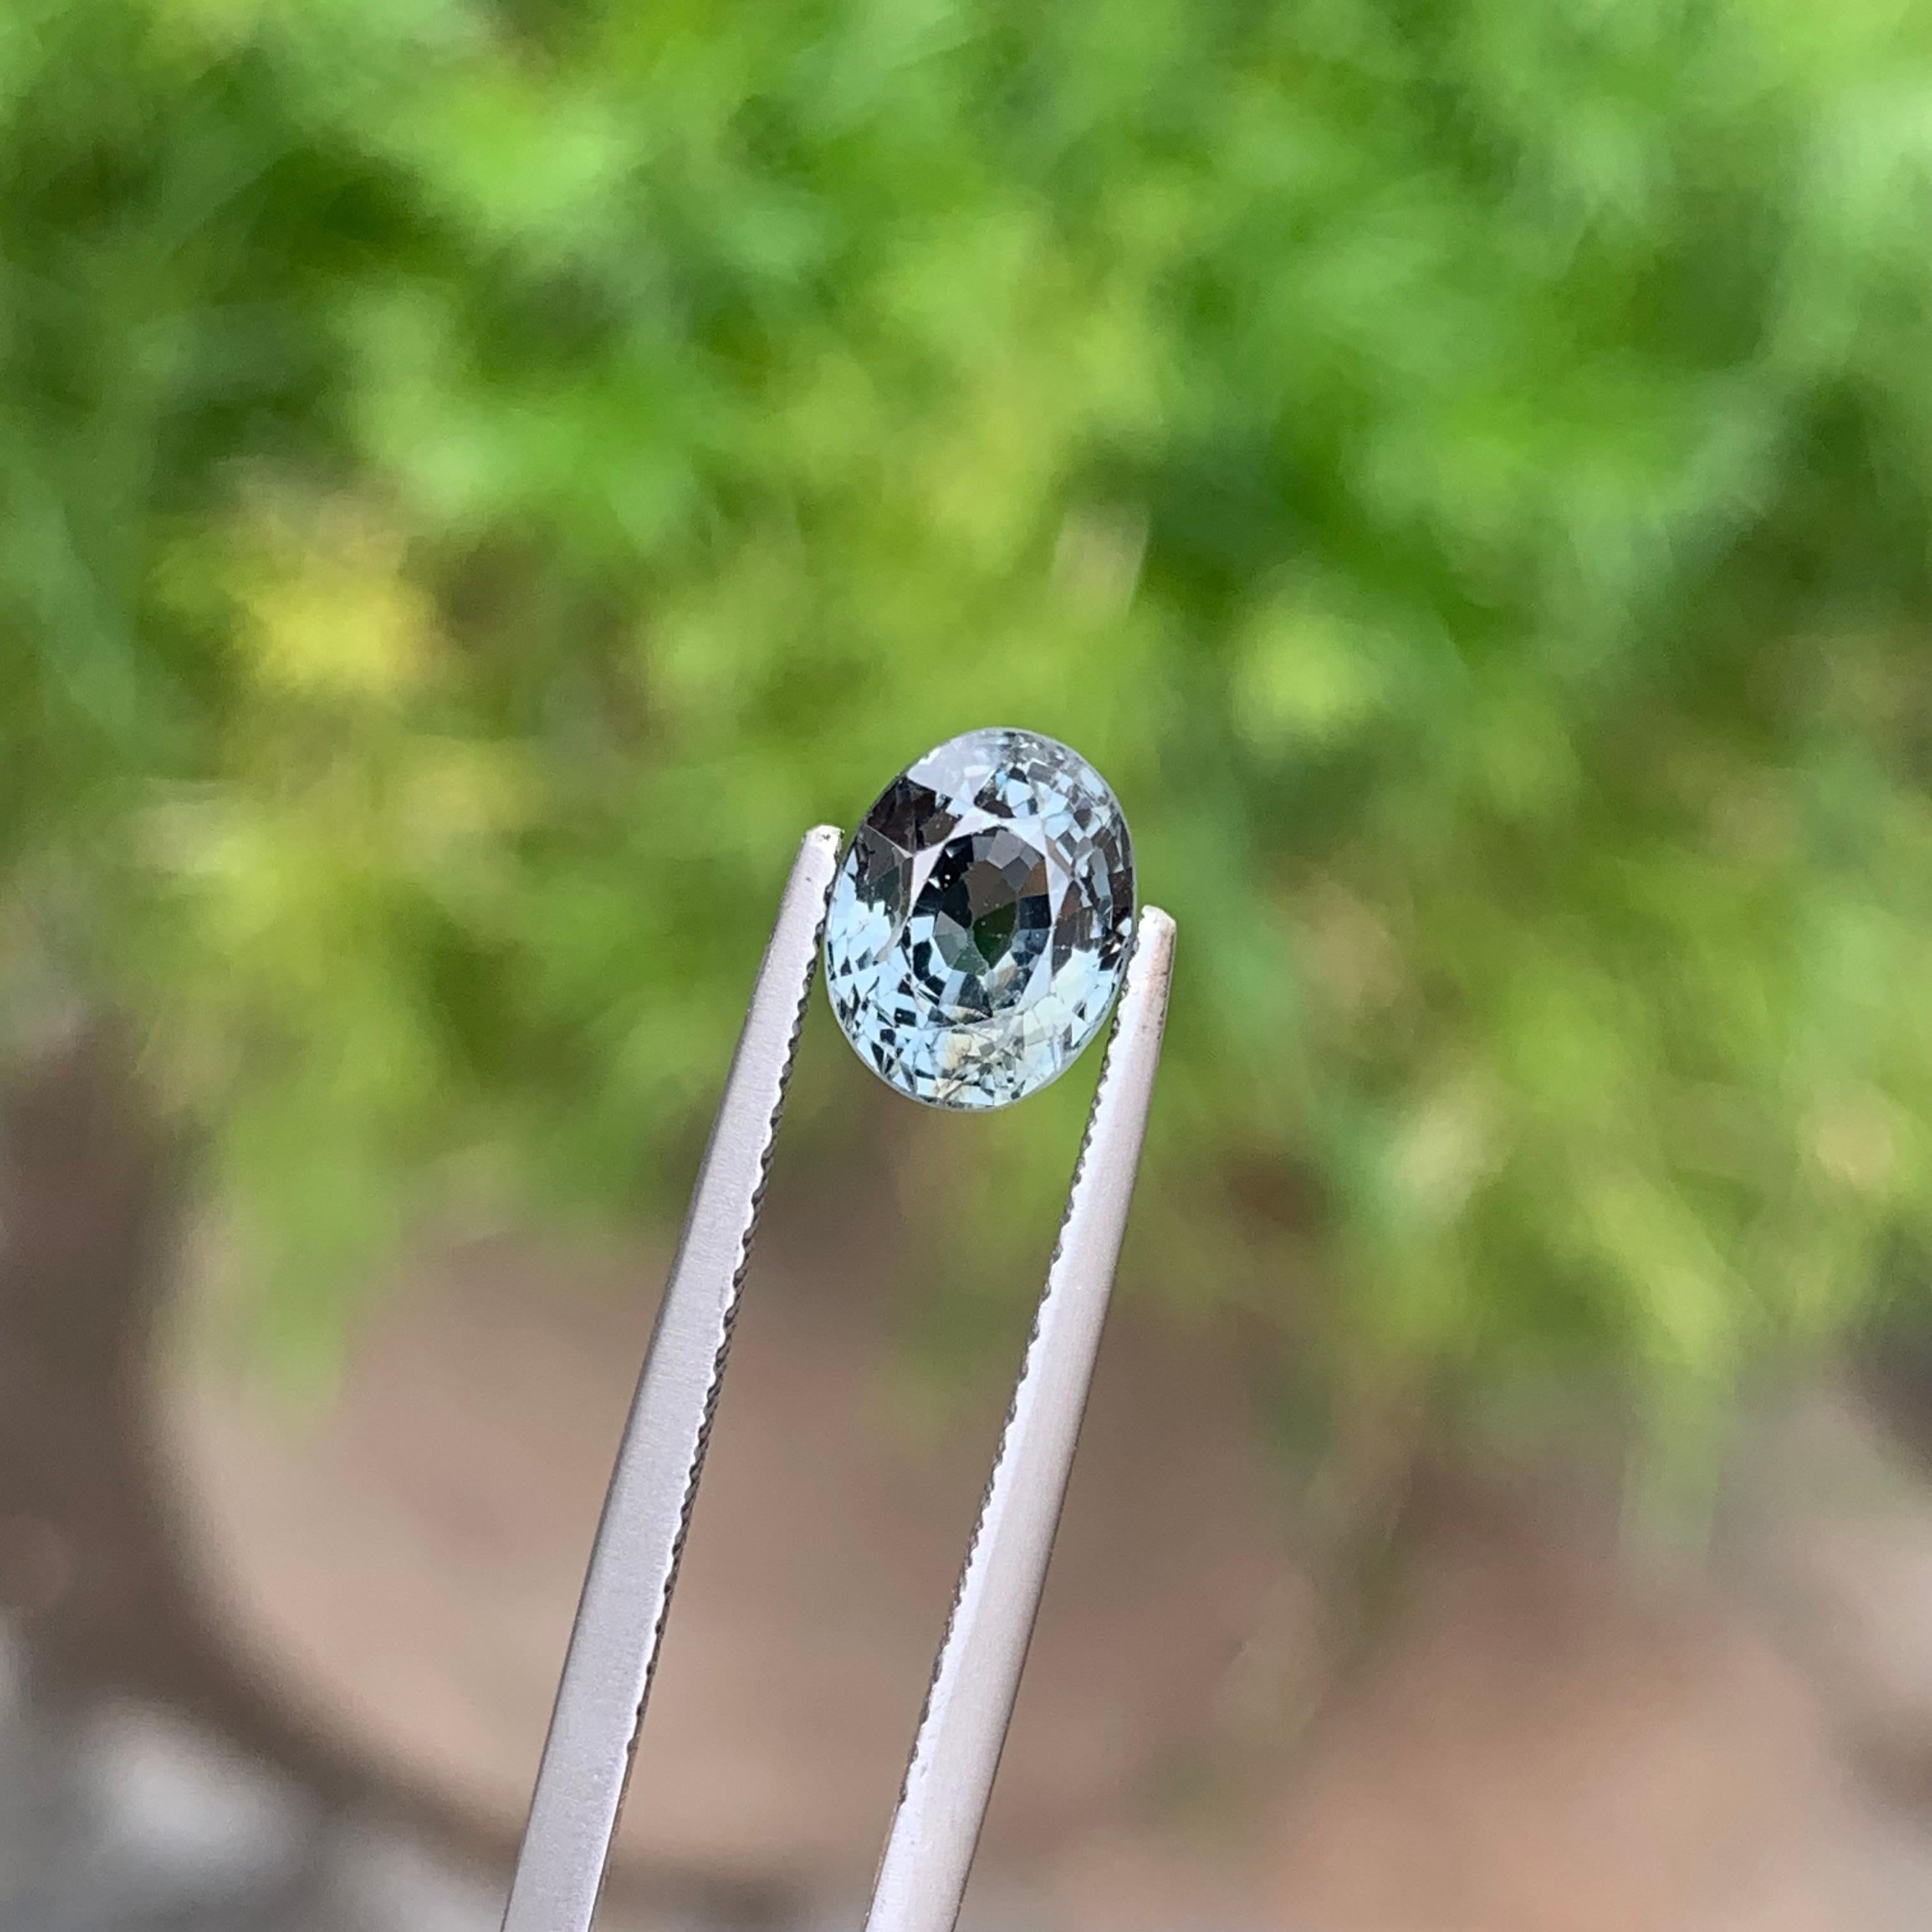 Gorgeous 2.15 Carat Natural Loose Gray Spinel Oval Mixed Cut from Burma Mine For Sale 3